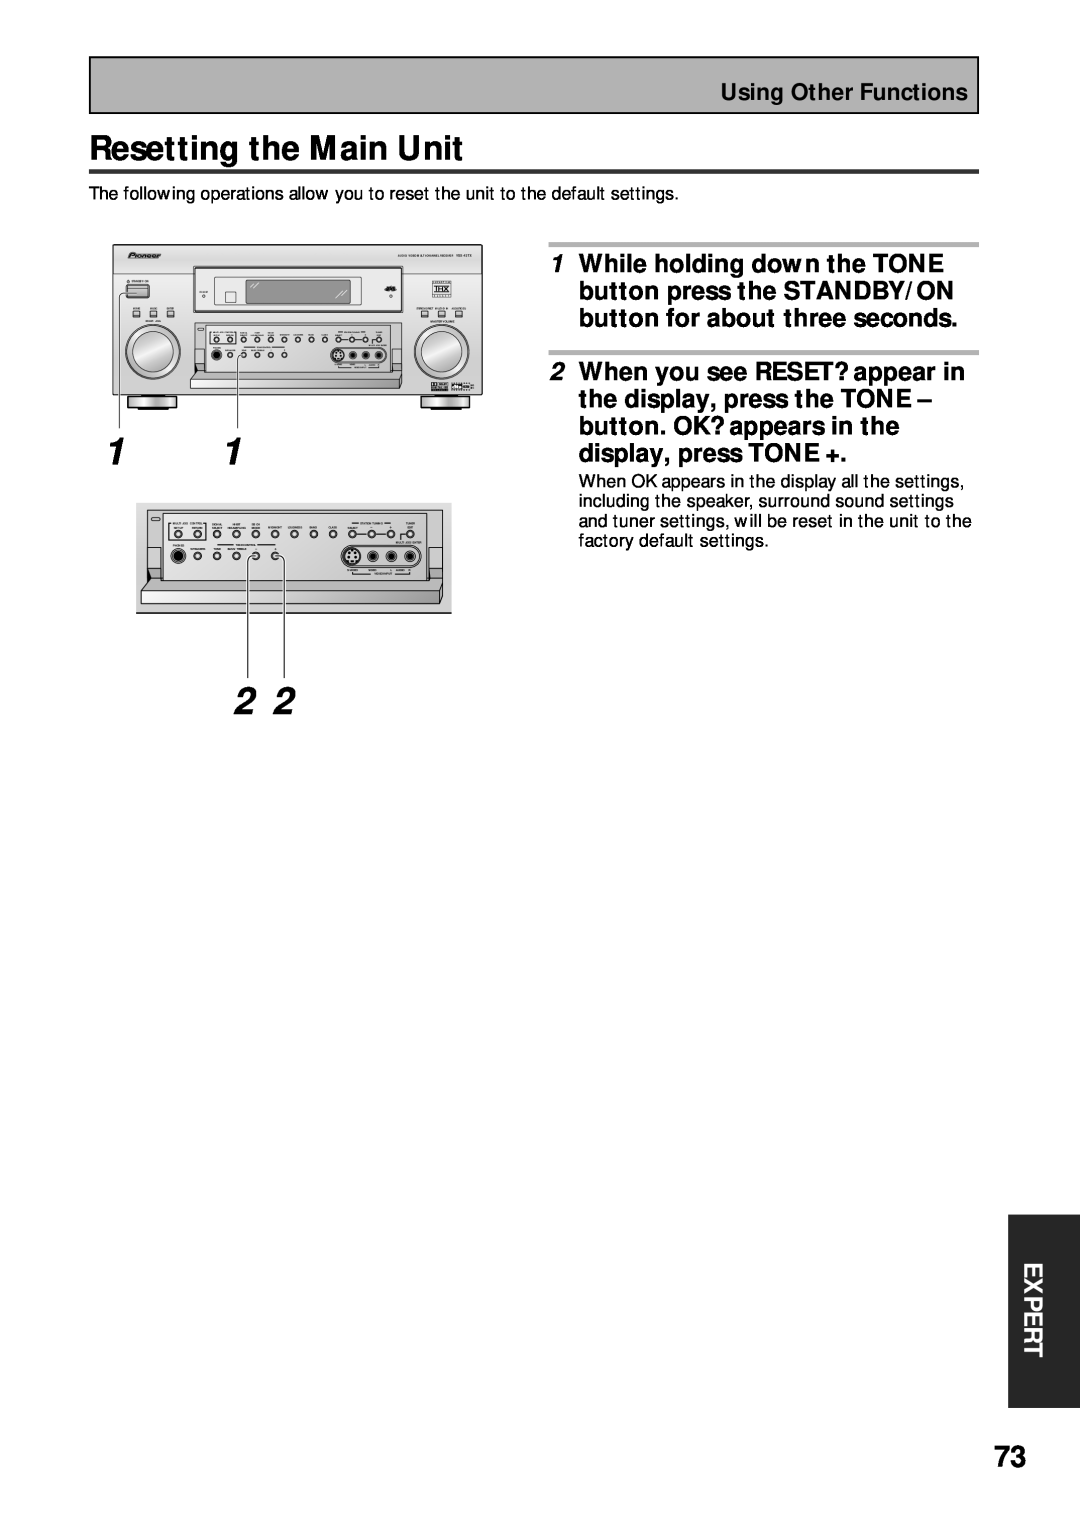 Pioneer VSX-43TX operating instructions Resetting the Main Unit, Expert 